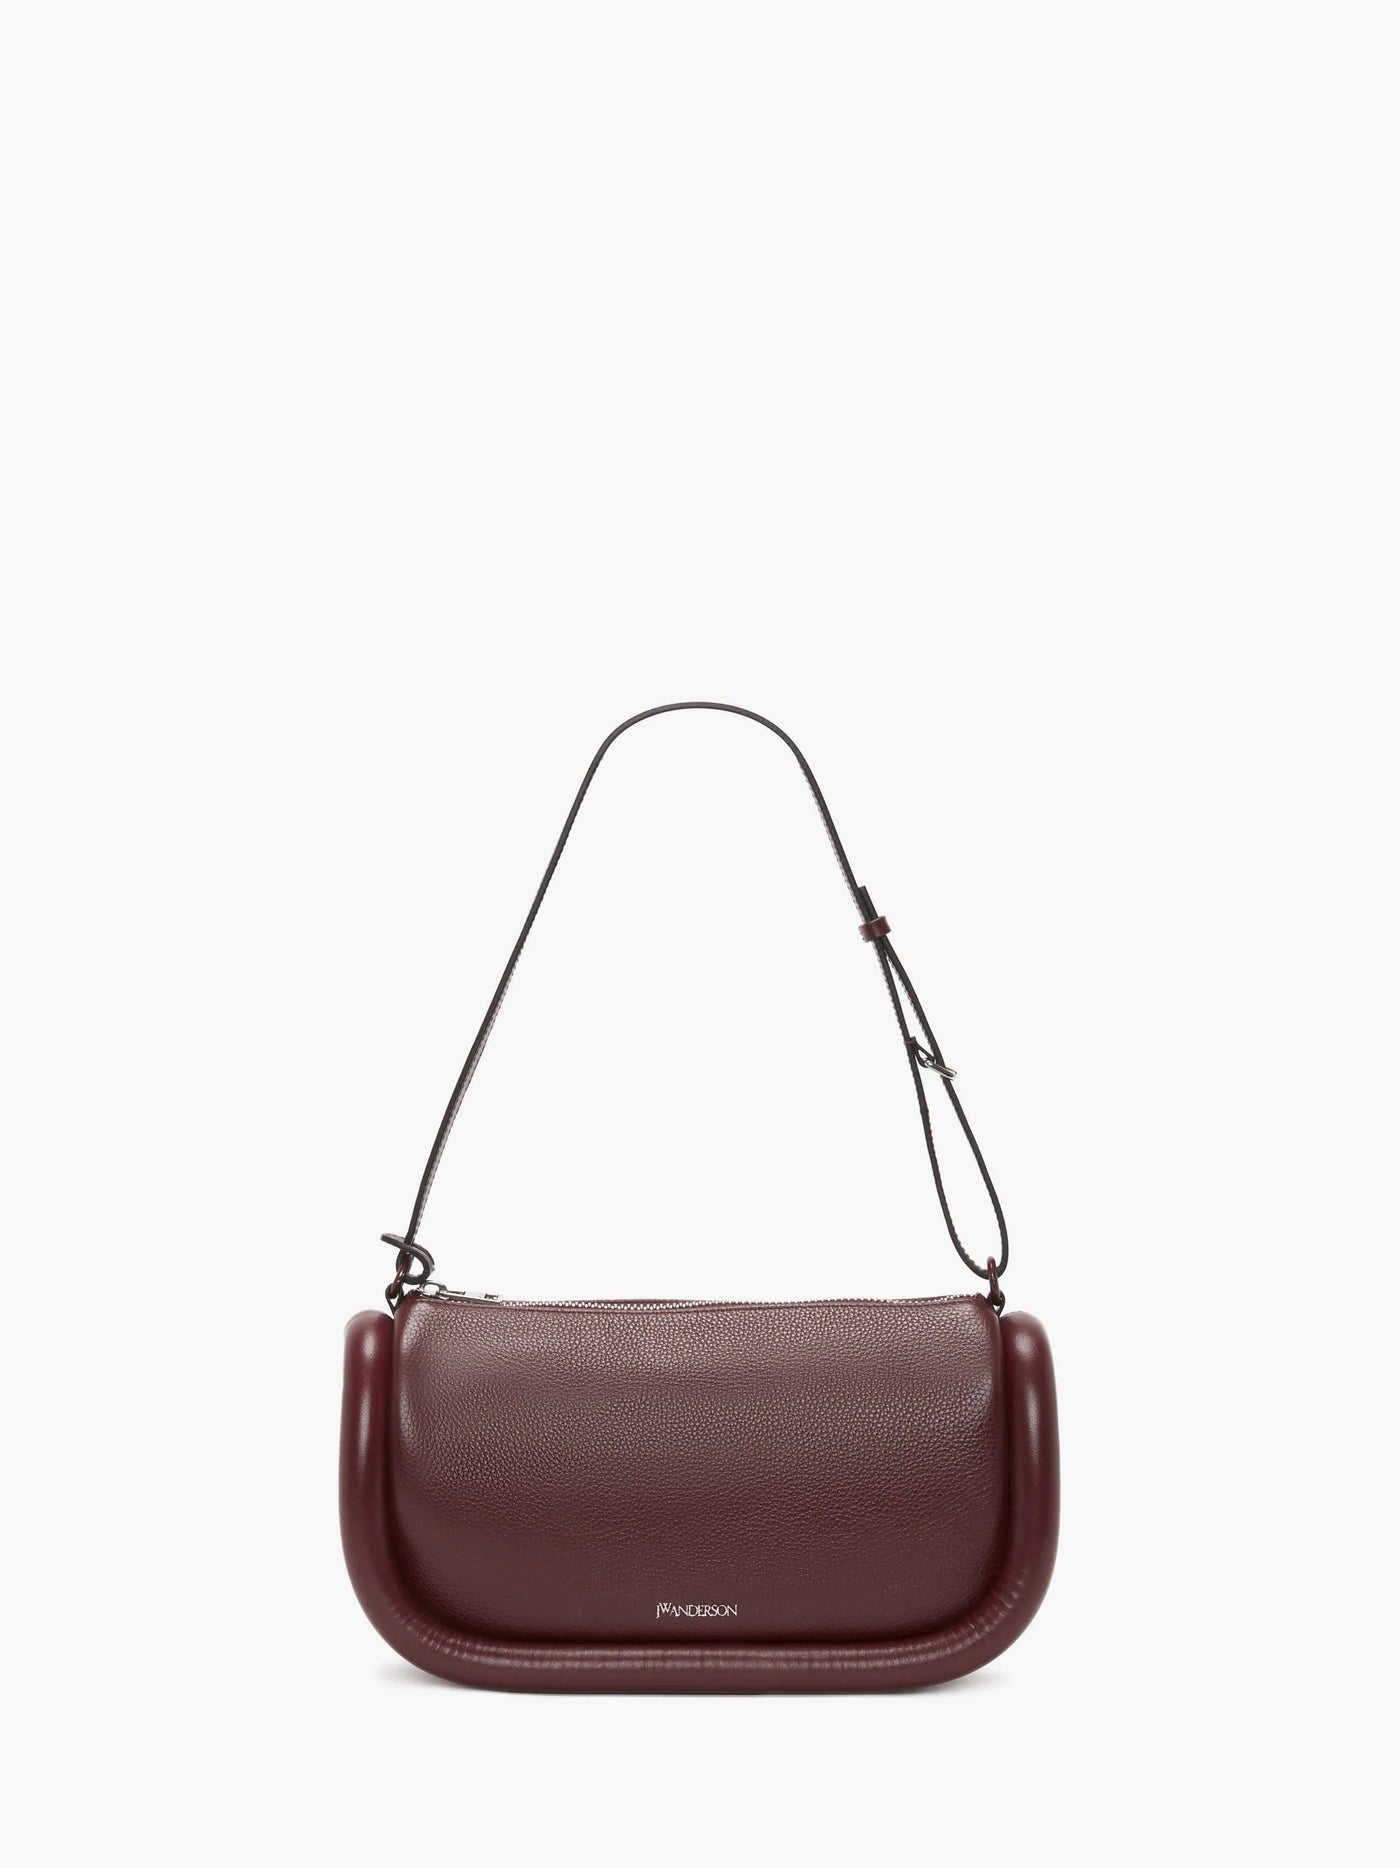 Bumper 15 Leather Crossbody Bag - More Colors Available